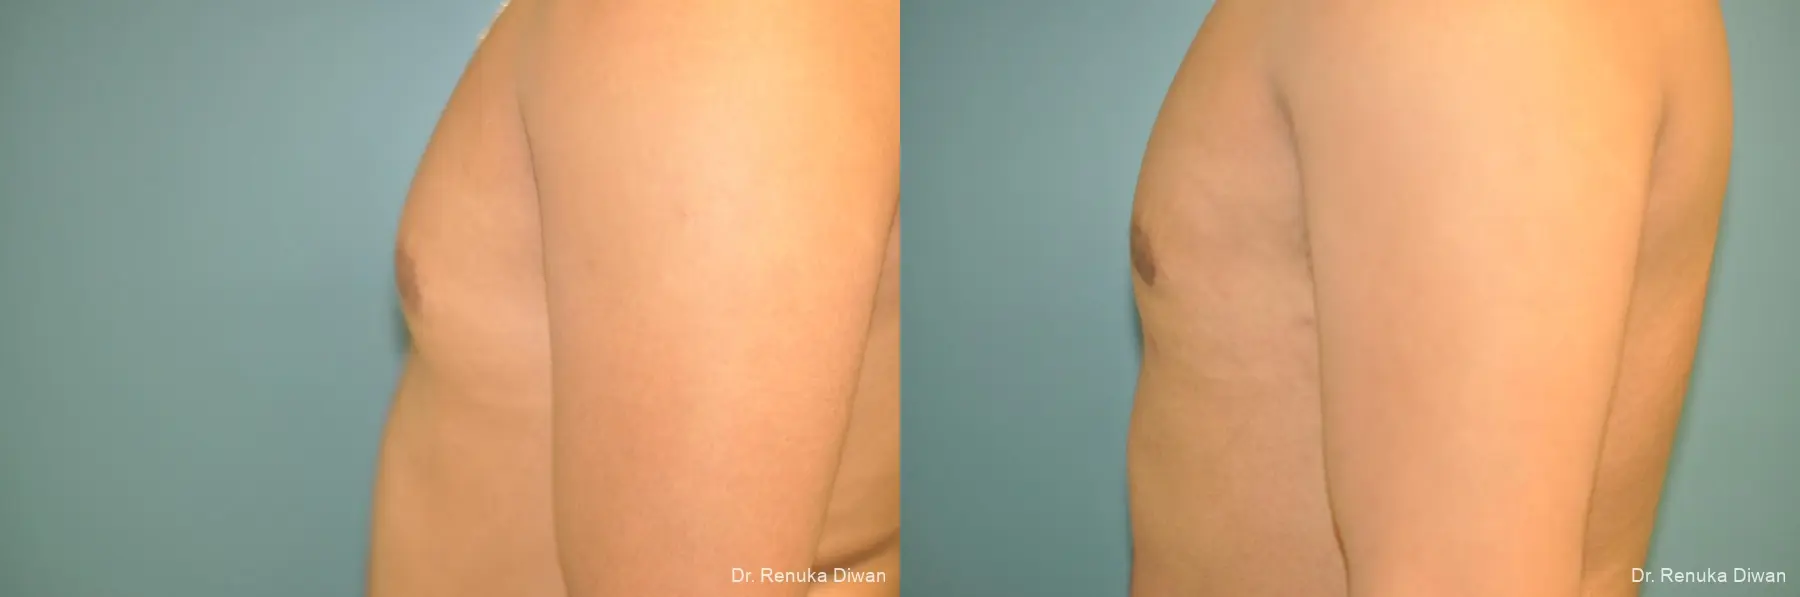 Liposuction: Patient 21 - Before and After 1